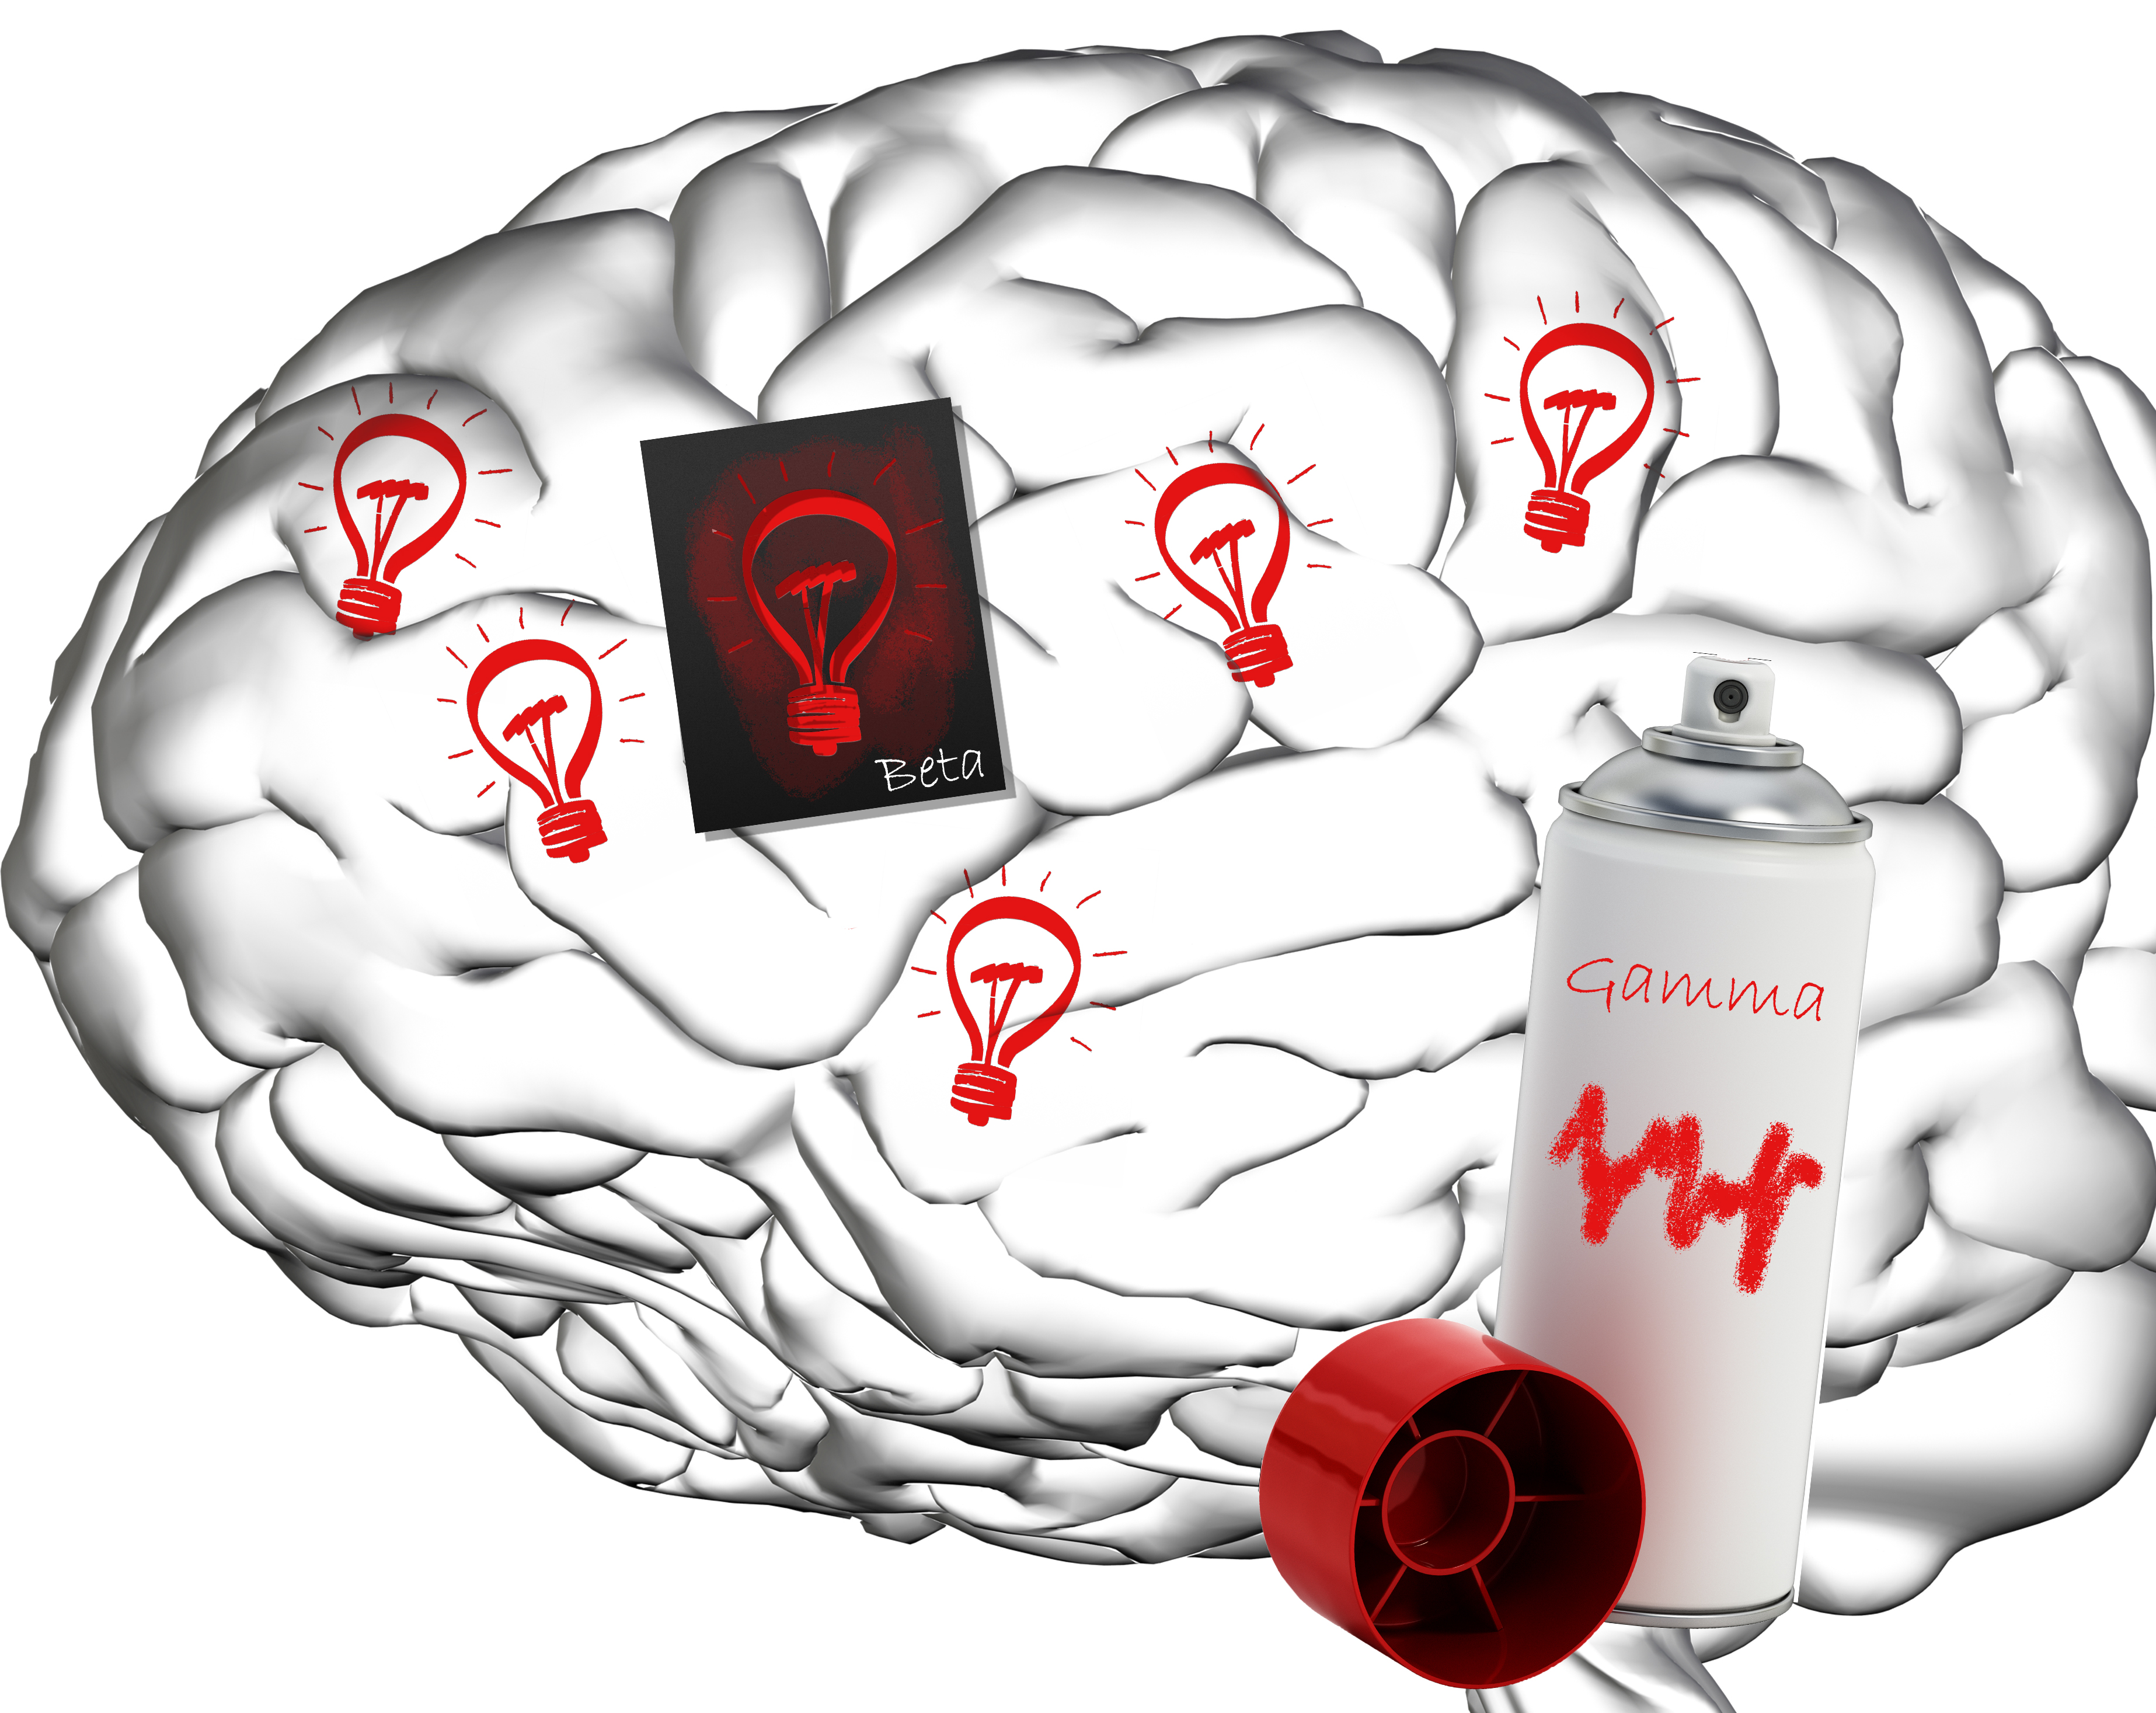 A black and white brain shown in profile is decorated with red light bulbs on its surface. In one spot, a stencil for making the light bulbs, labeled "beta," is present. Nearby is a can of red spray paint labeled "gamma" with a little wave on it.